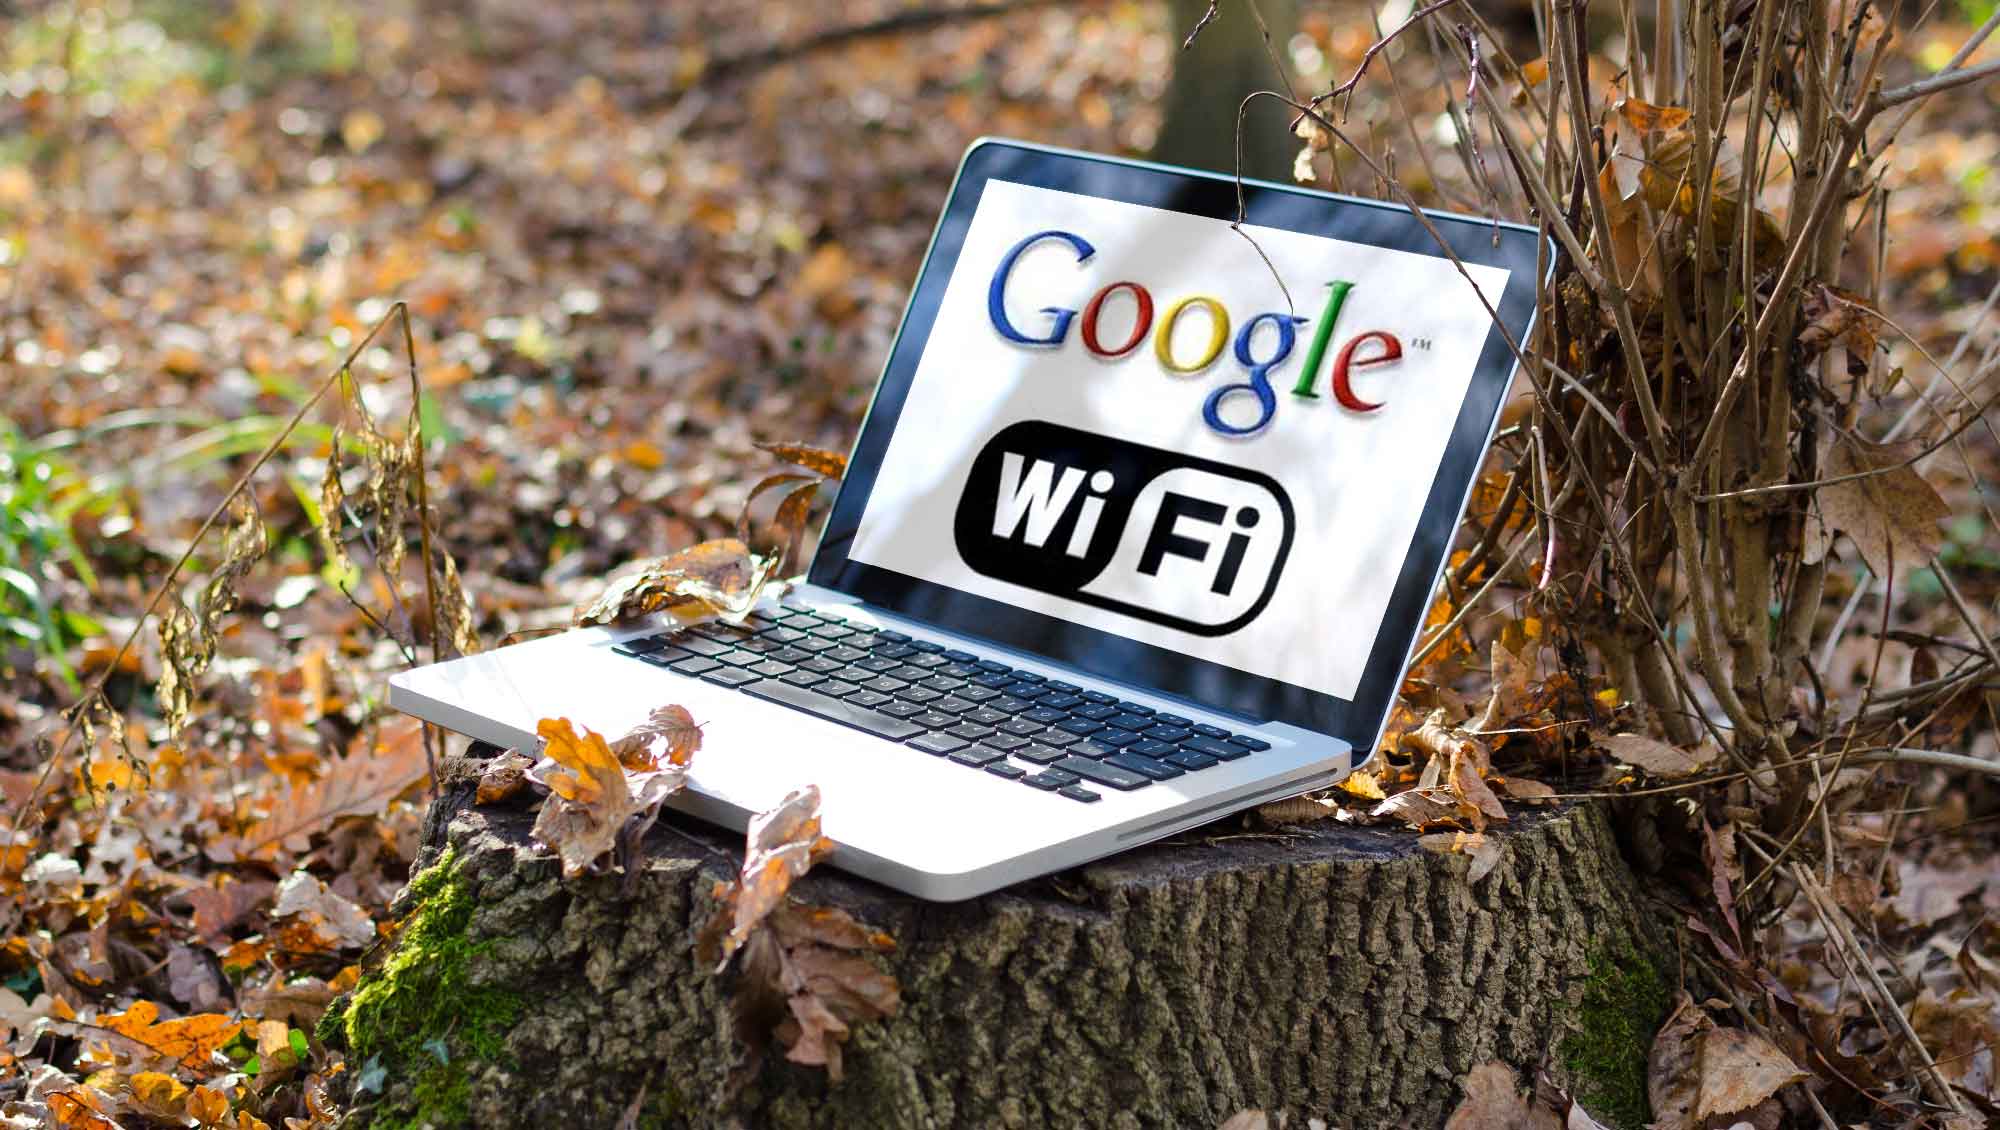 Free Google WiFi Now Available For Residents Of Mountain View, California (2006)